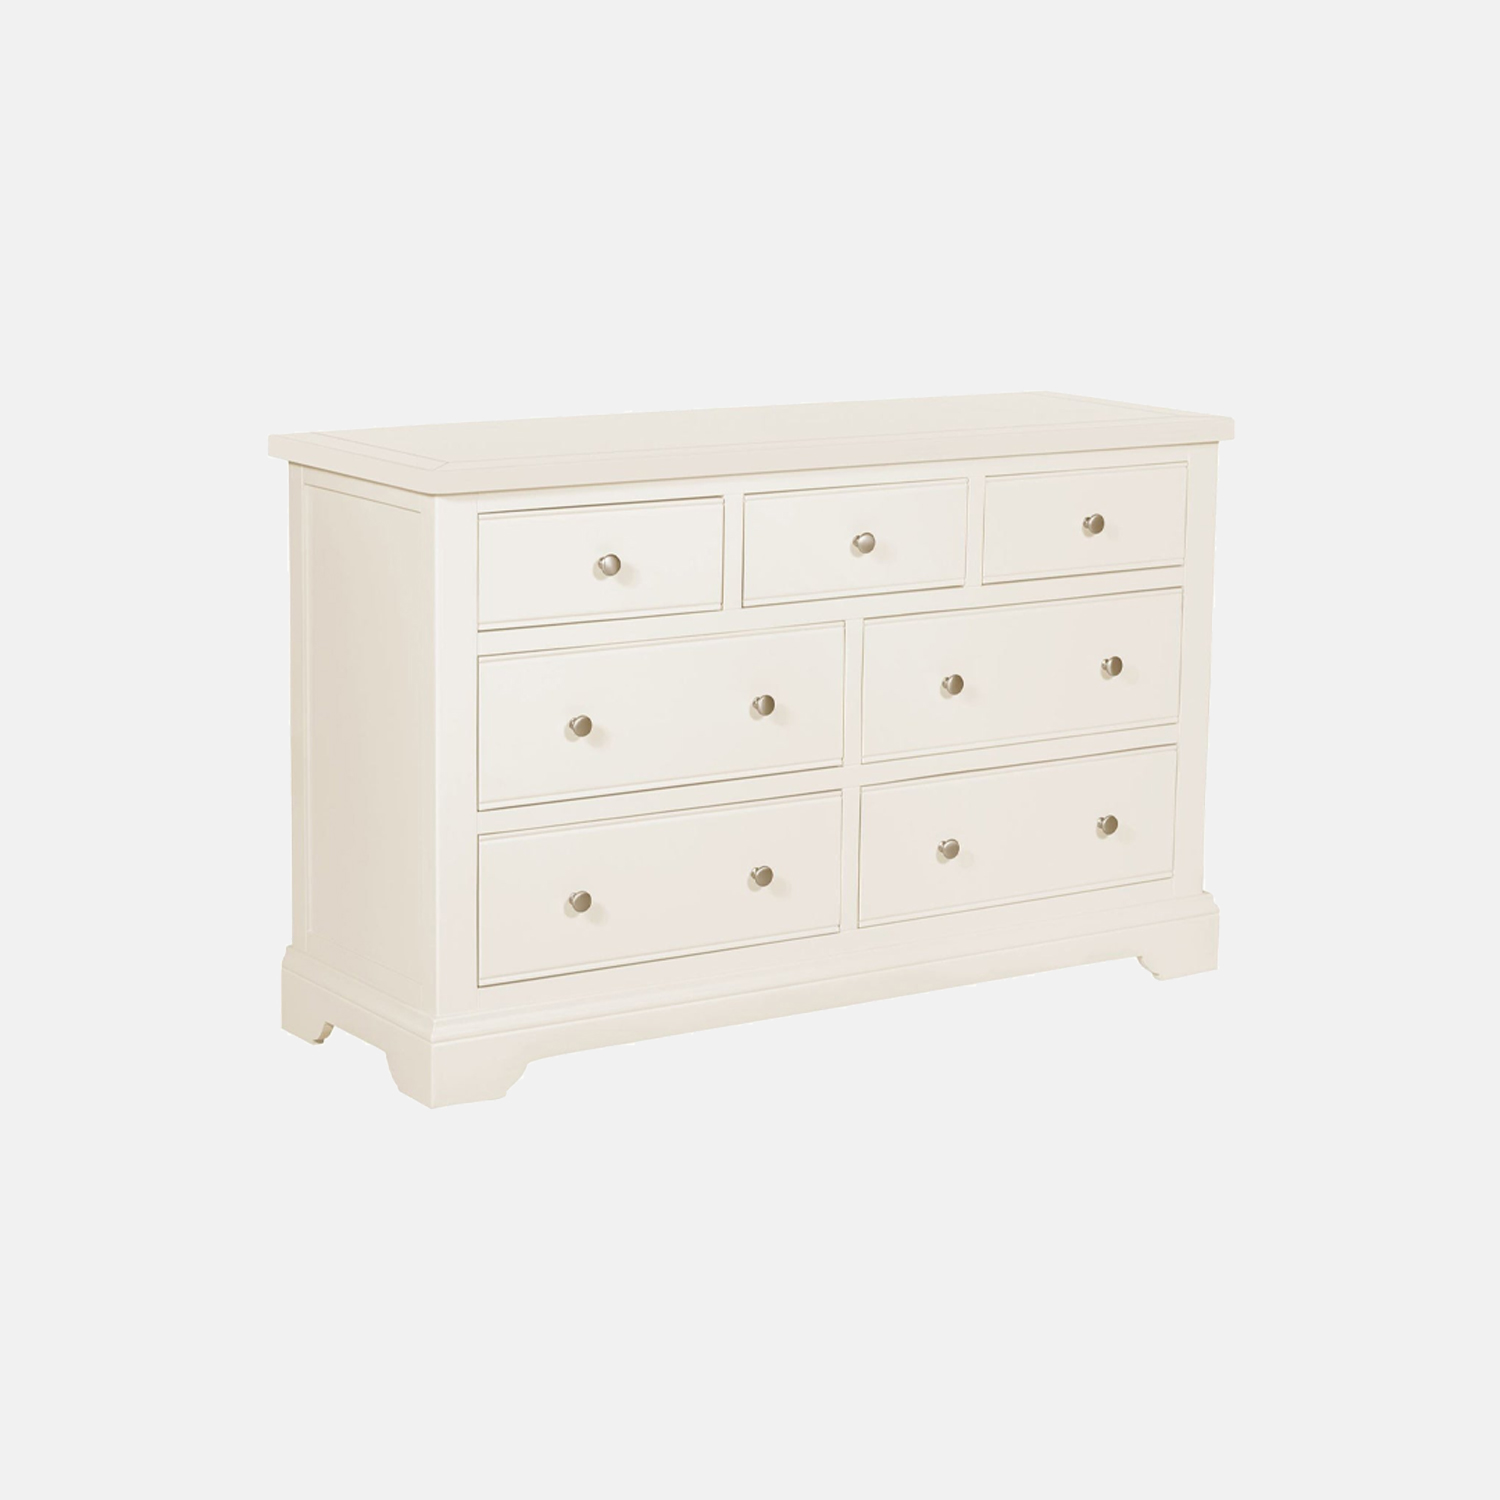 Harding Bedroom Furniture Comes In 2 Different Finishes - Shop Online Now